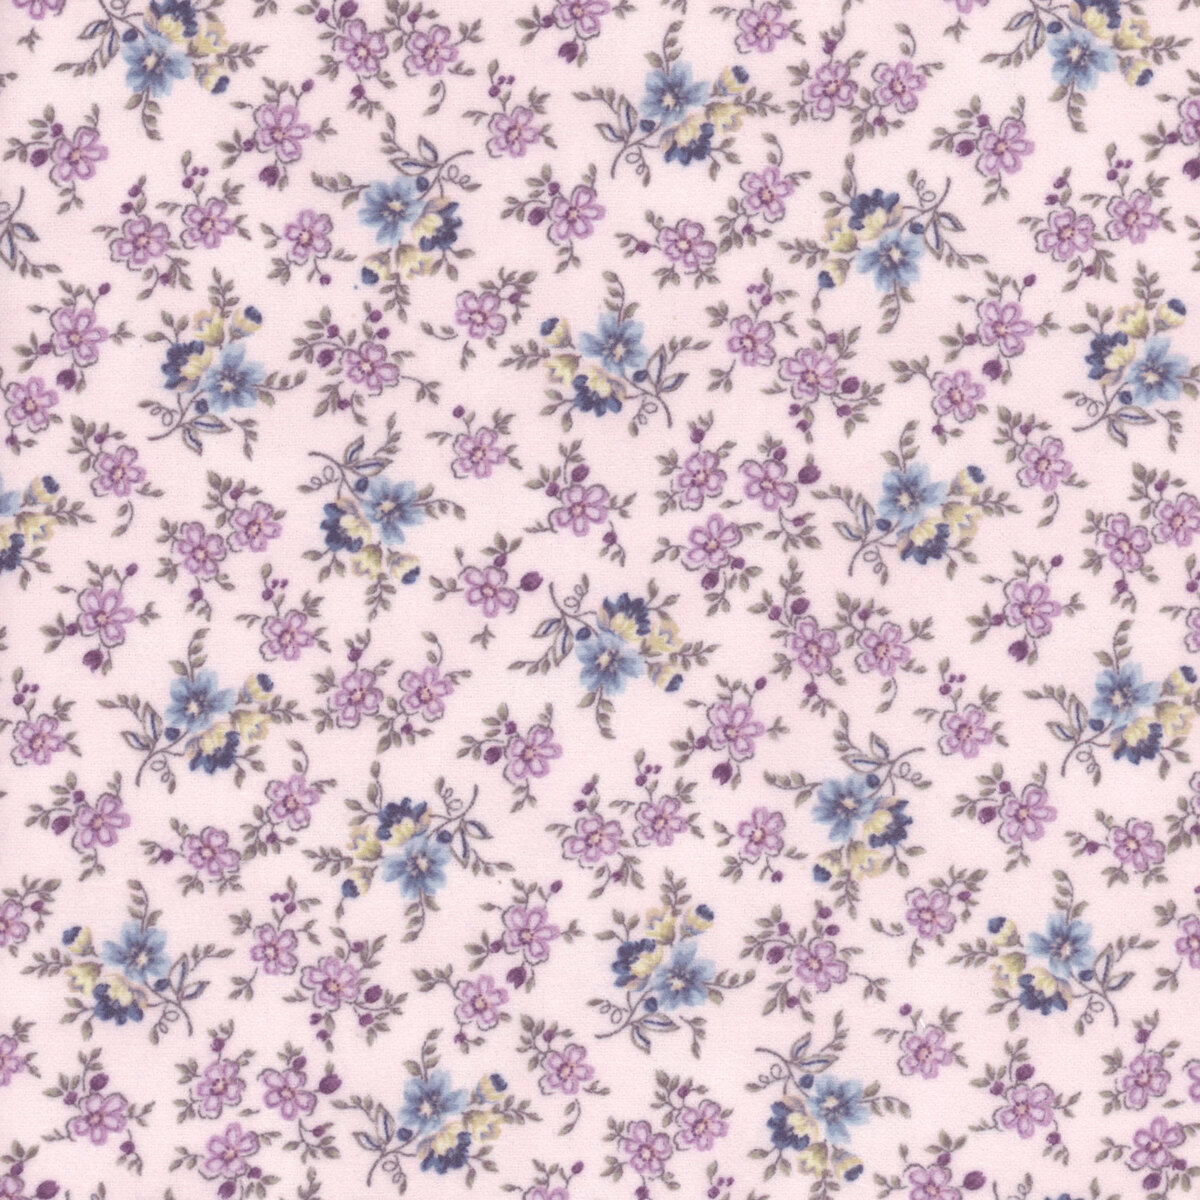 Twilight Garden Flannel 3192F-55 Lilac by Mary Jane Carey for